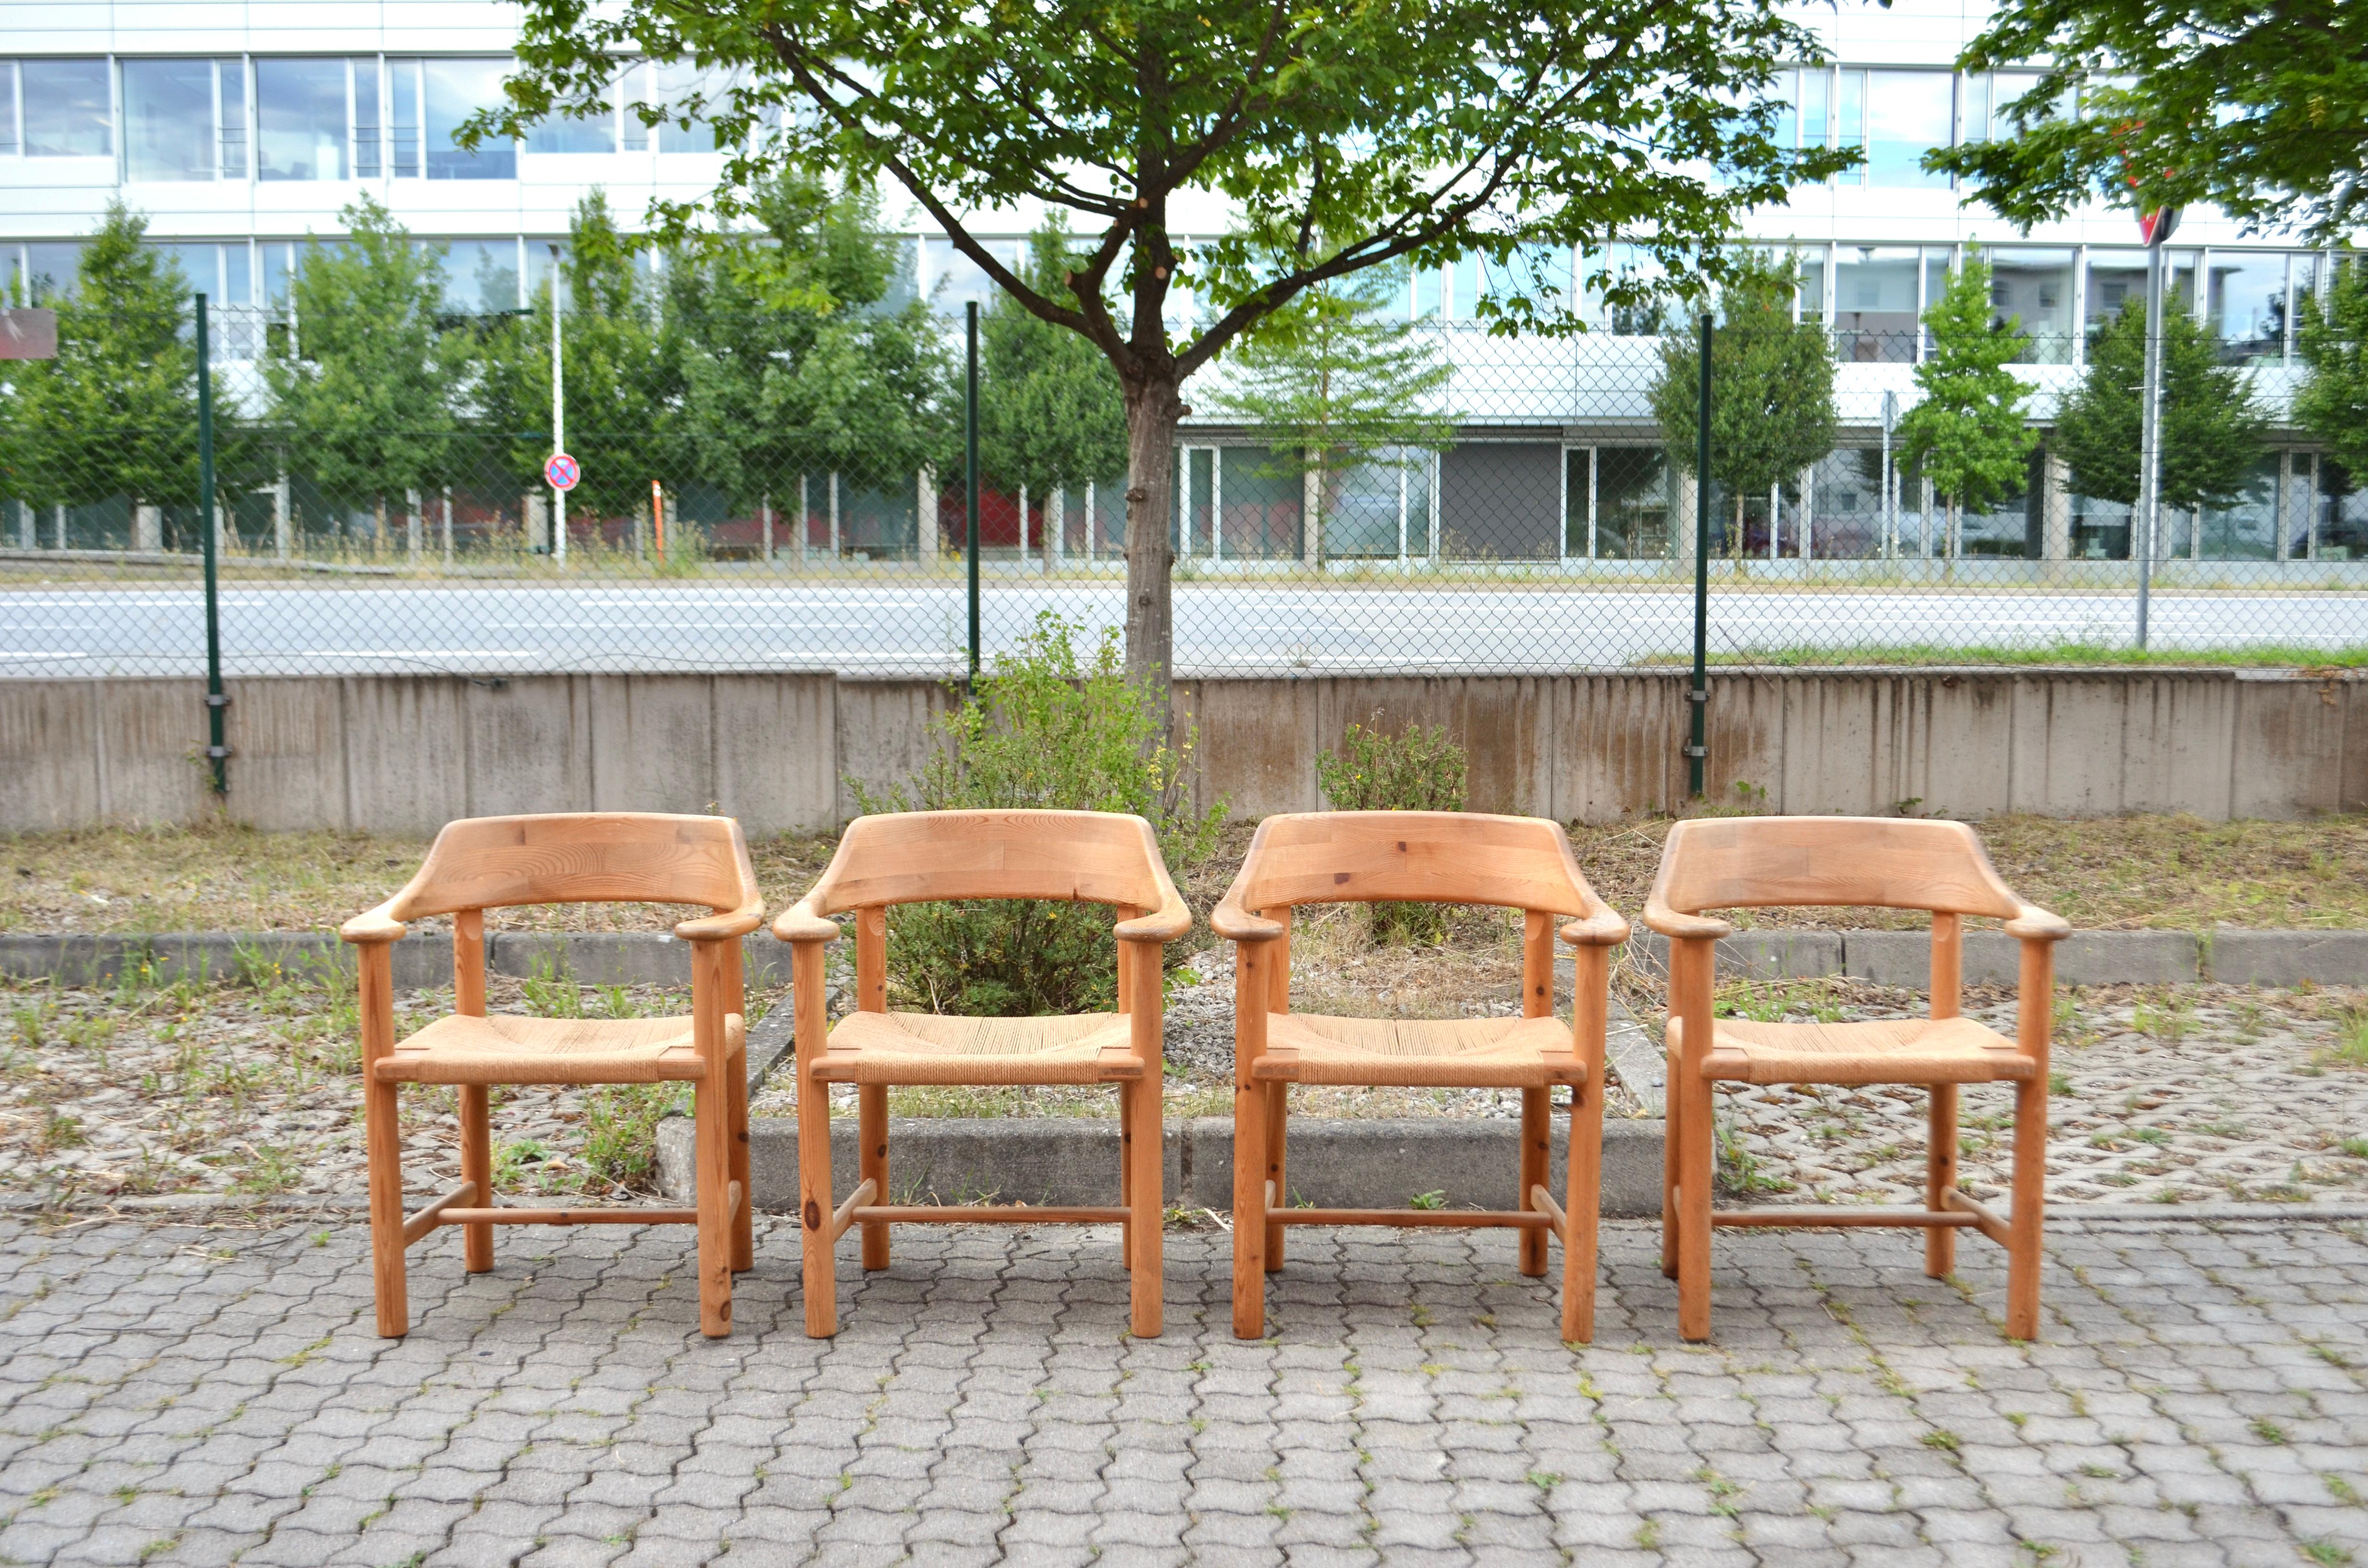 Dining chairs designed by Rainer Daumiller and manufactured by Hirtshals Savvaerk.
Model with papercord and armrests.
Solid scandinavian pine wood which is beautiful patinated.
These chairs are very comfortable.

Set of 4 chairs.

Dimensions